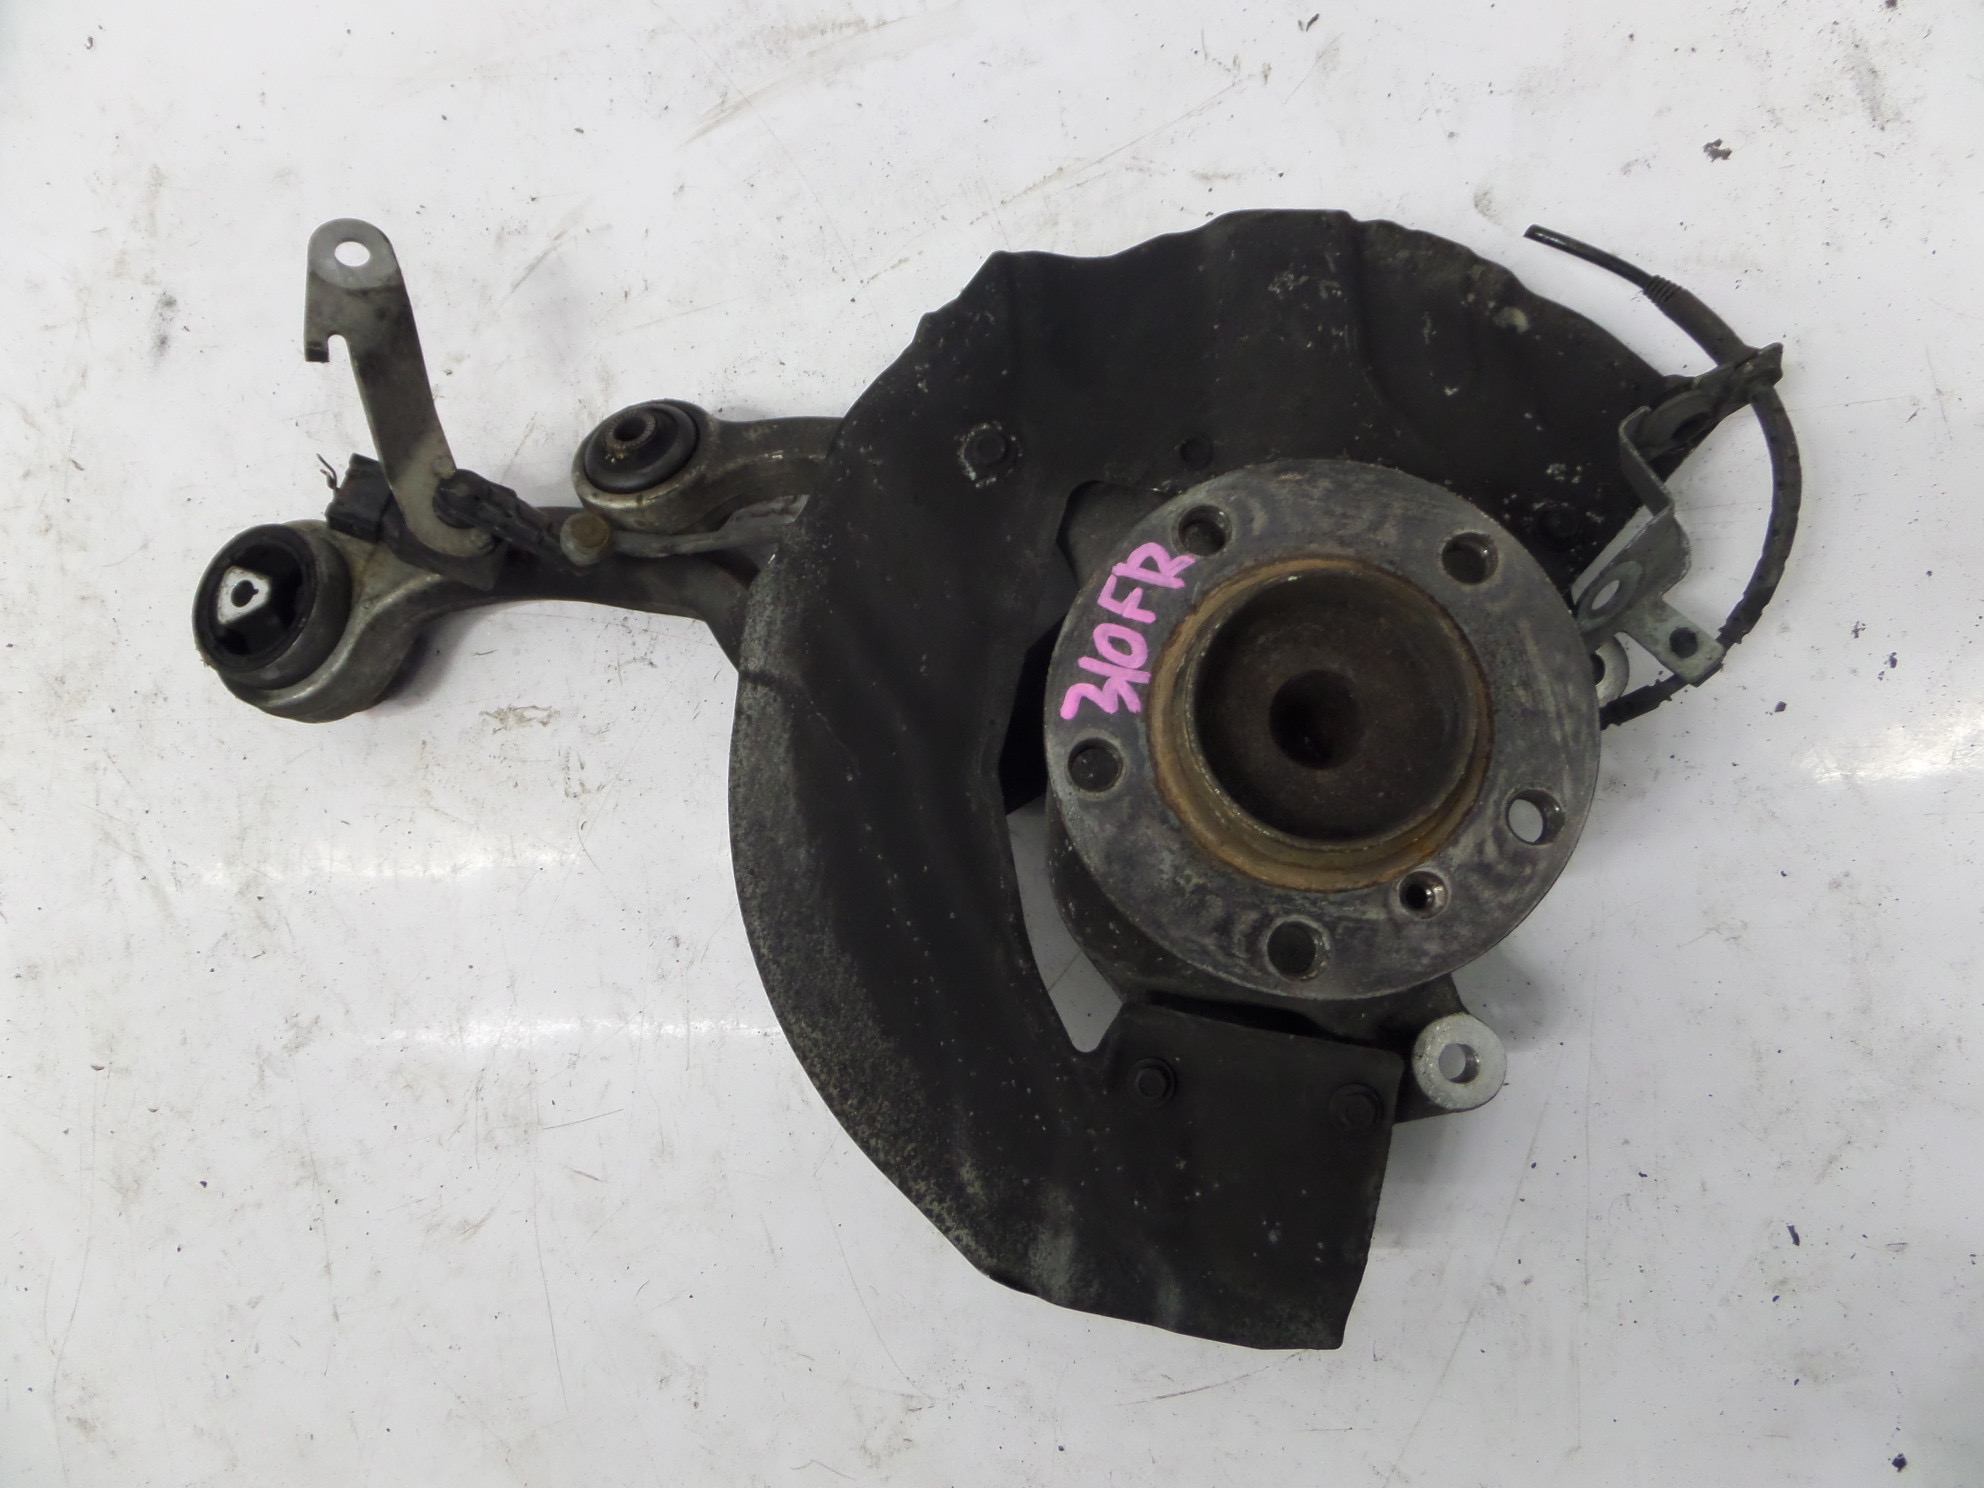 BMW 750Li Right Front Knuckle Assembly w/ Control Arms E66 E65 OEM | eBay